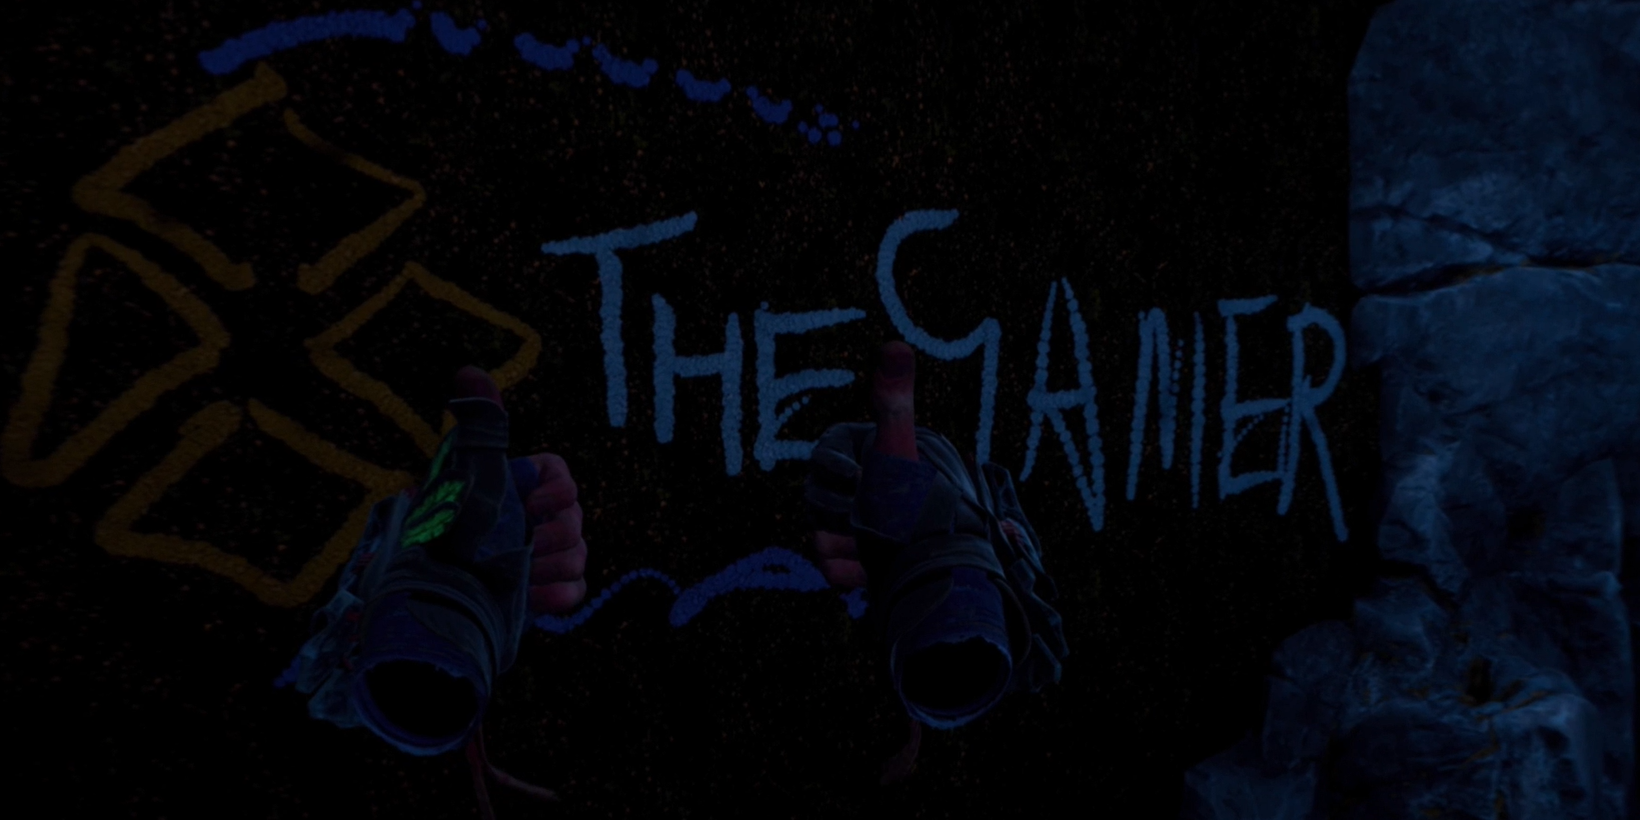 TheGamer painted on a wall in Horizon Call of the Mountain